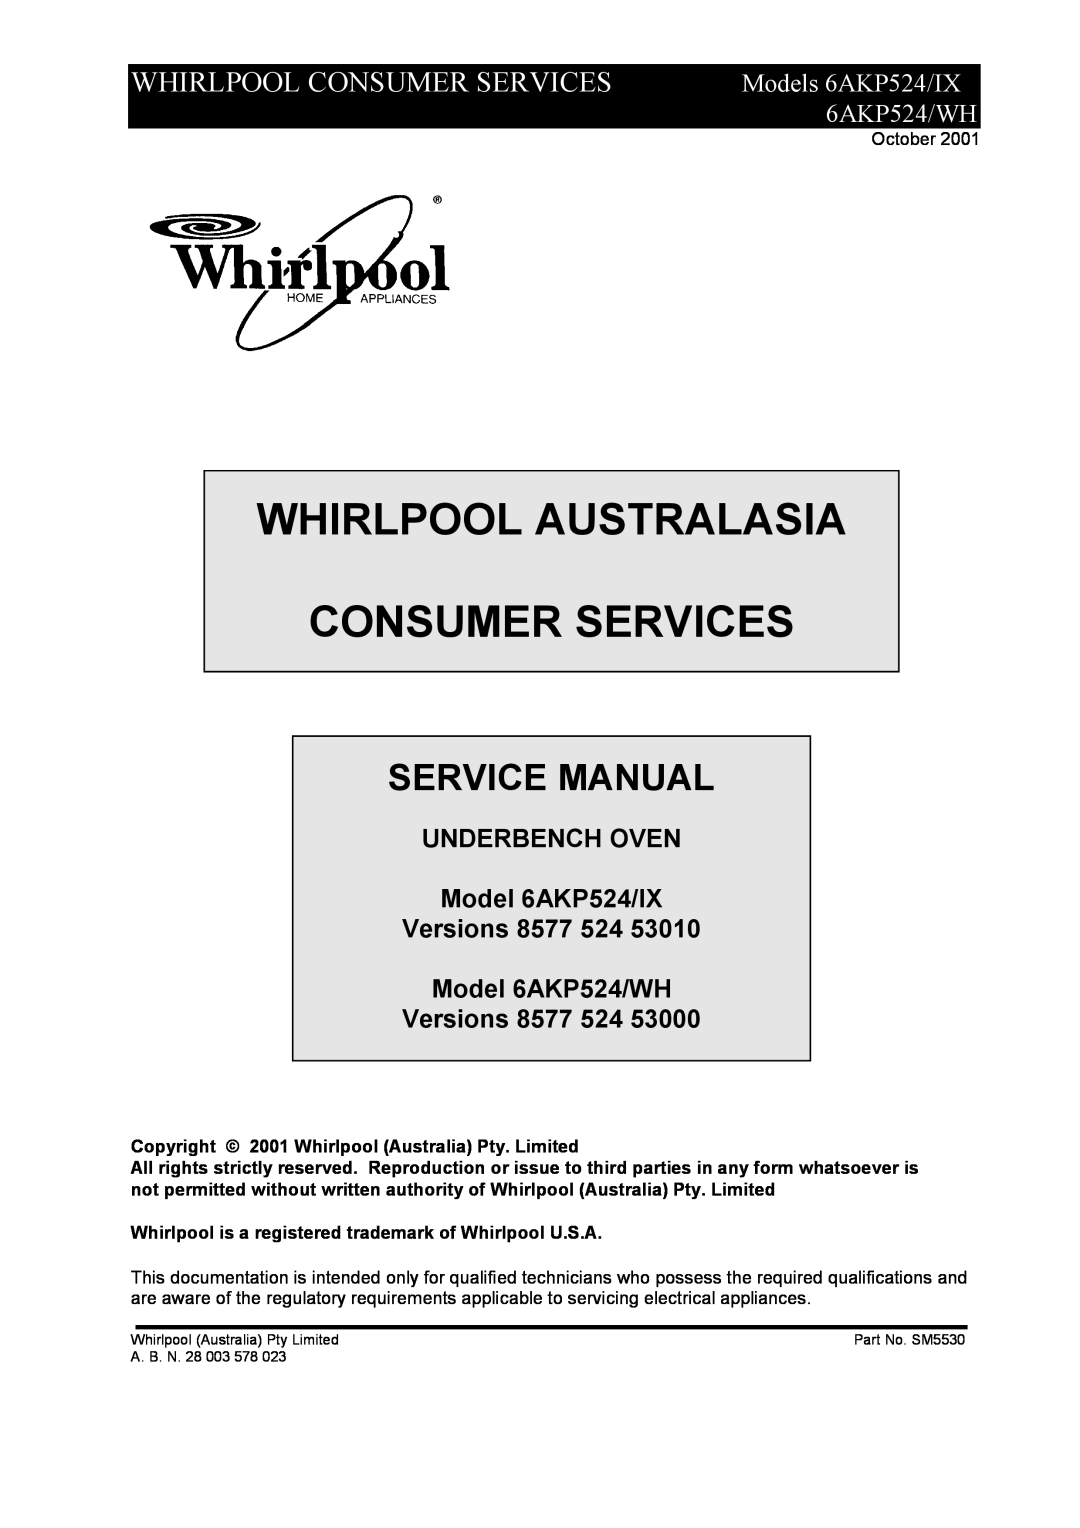 Whirlpool service manual Whirlpool Consumer Services, Models 6AKP524/IX, 6AKP524/WH, UNDERBENCH OVEN Model 6AKP524/IX 